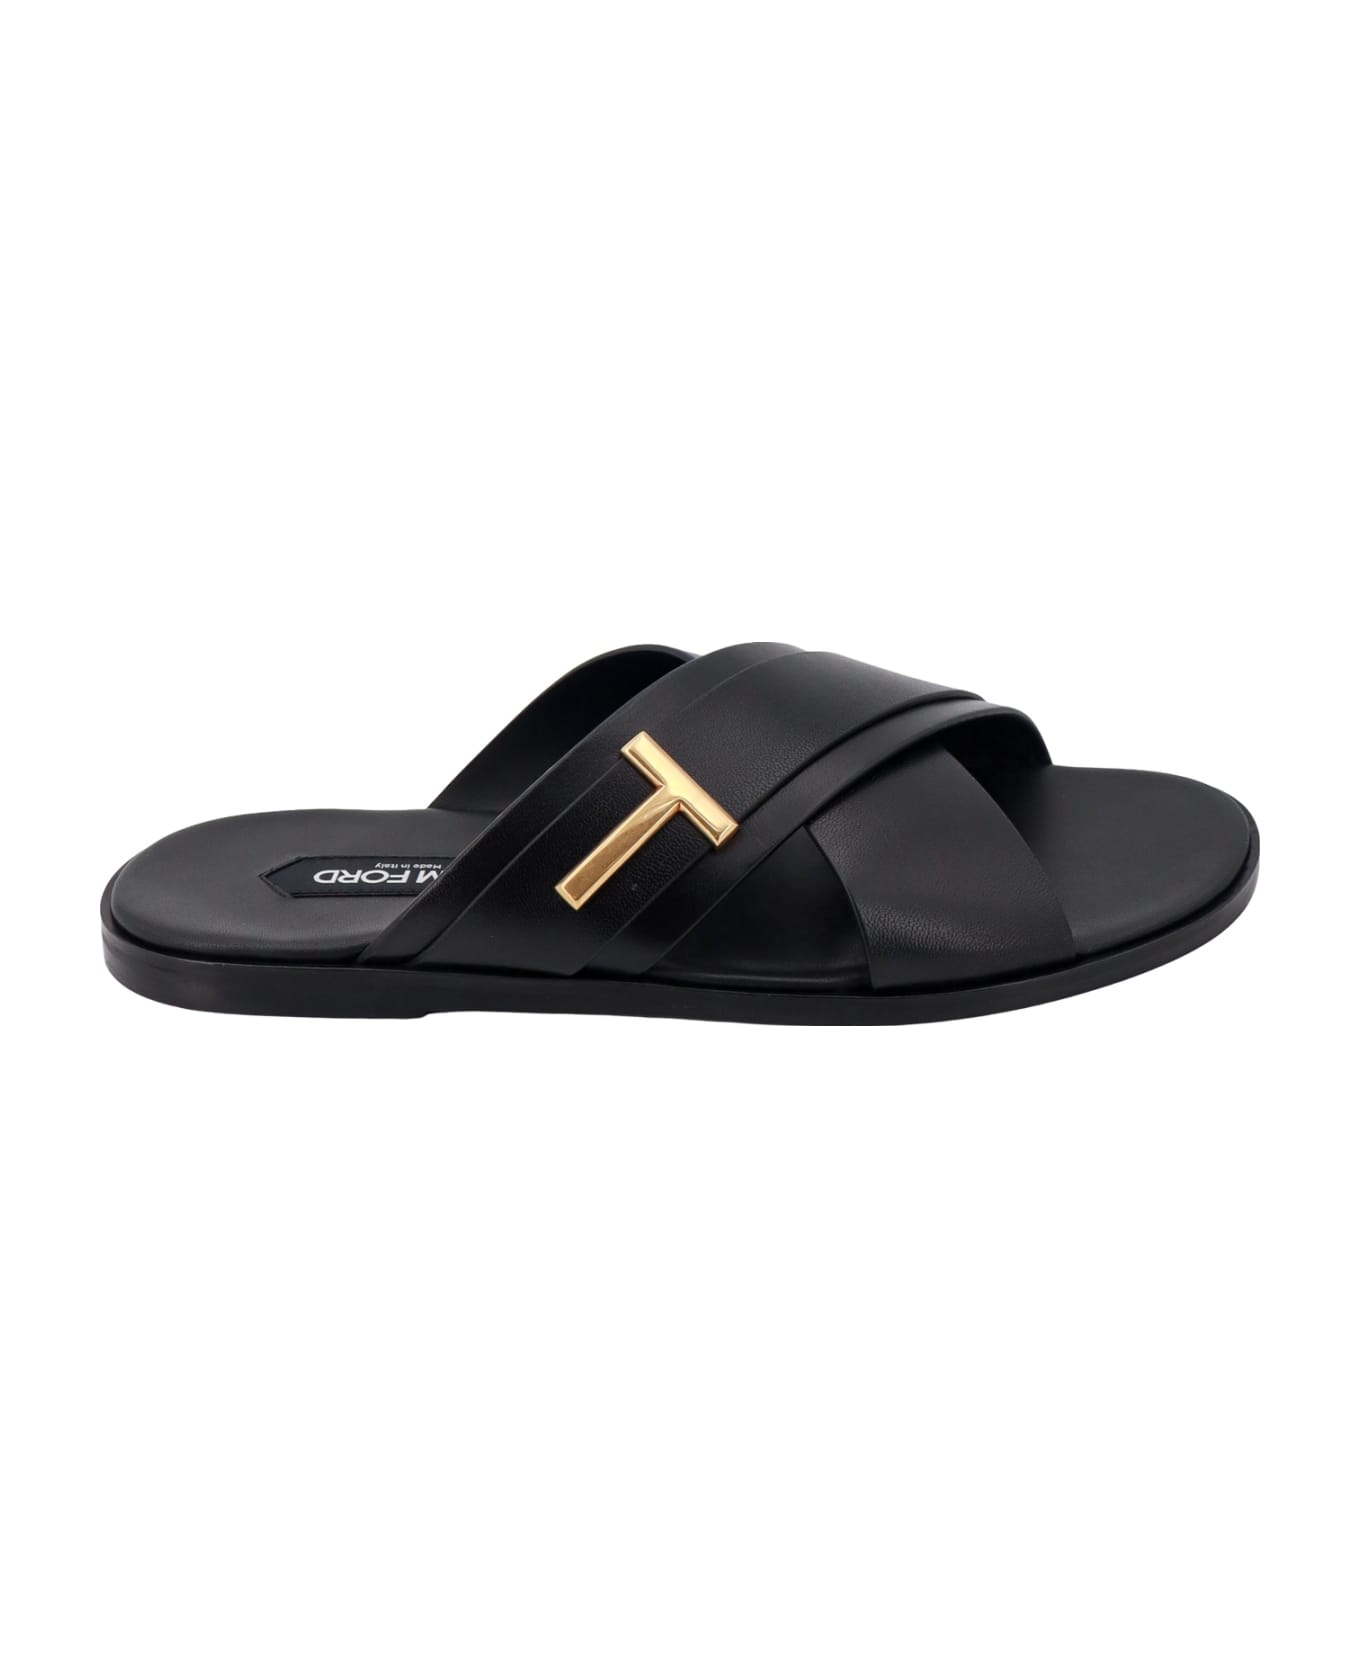 Tom Ford Sandals - Black その他各種シューズ